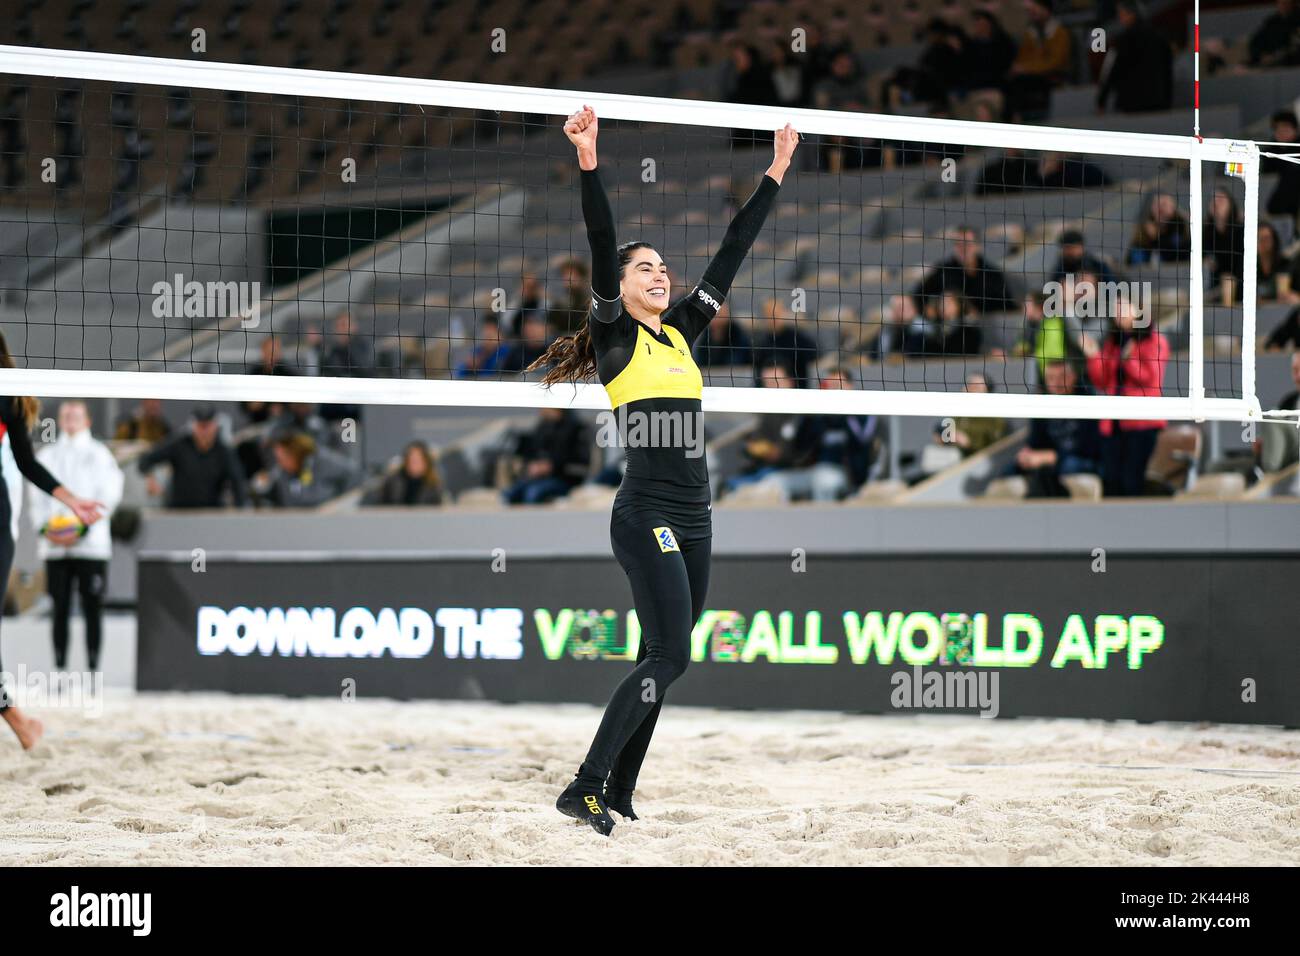 Paris, France on September 29, 2022. Carol Horta of Brazil during the volleyball Beach Pro Tour Elite 16, at Roland-Garros stadium, in Paris, France on September 29, 2022. Stock Photo